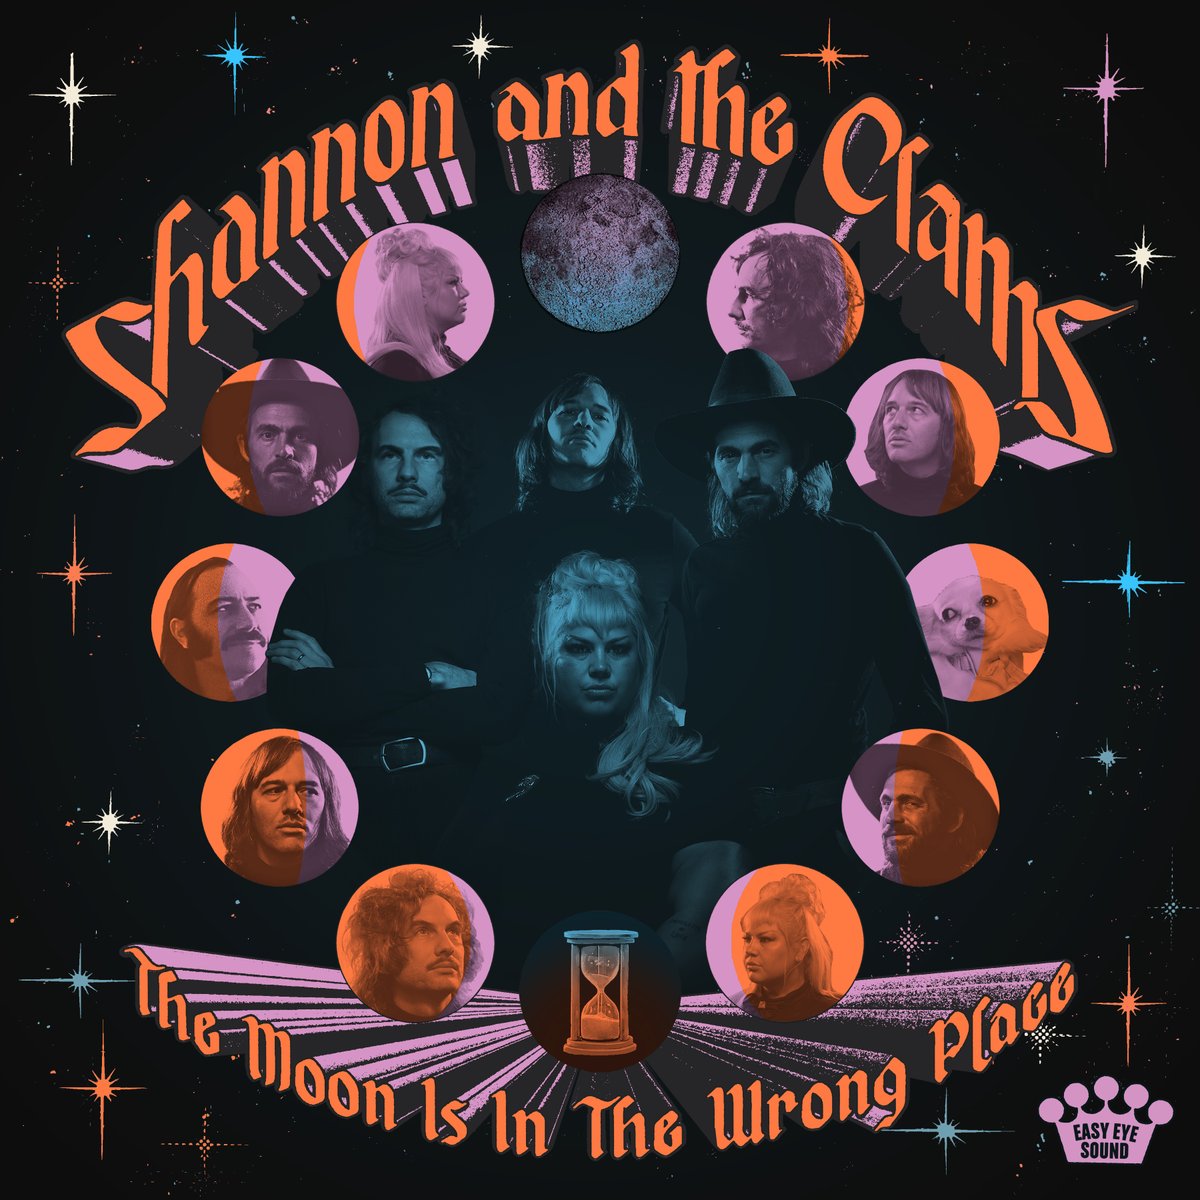 ‘The Moon Is In The Wrong Place’ by @shanandtheclams is available everywhere now! Stream the brand new Dan Auerbach-produced album now: click.ees.link/tmiitwp #shannonandtheclams #easyeyesound #themoonisinthewrongplace